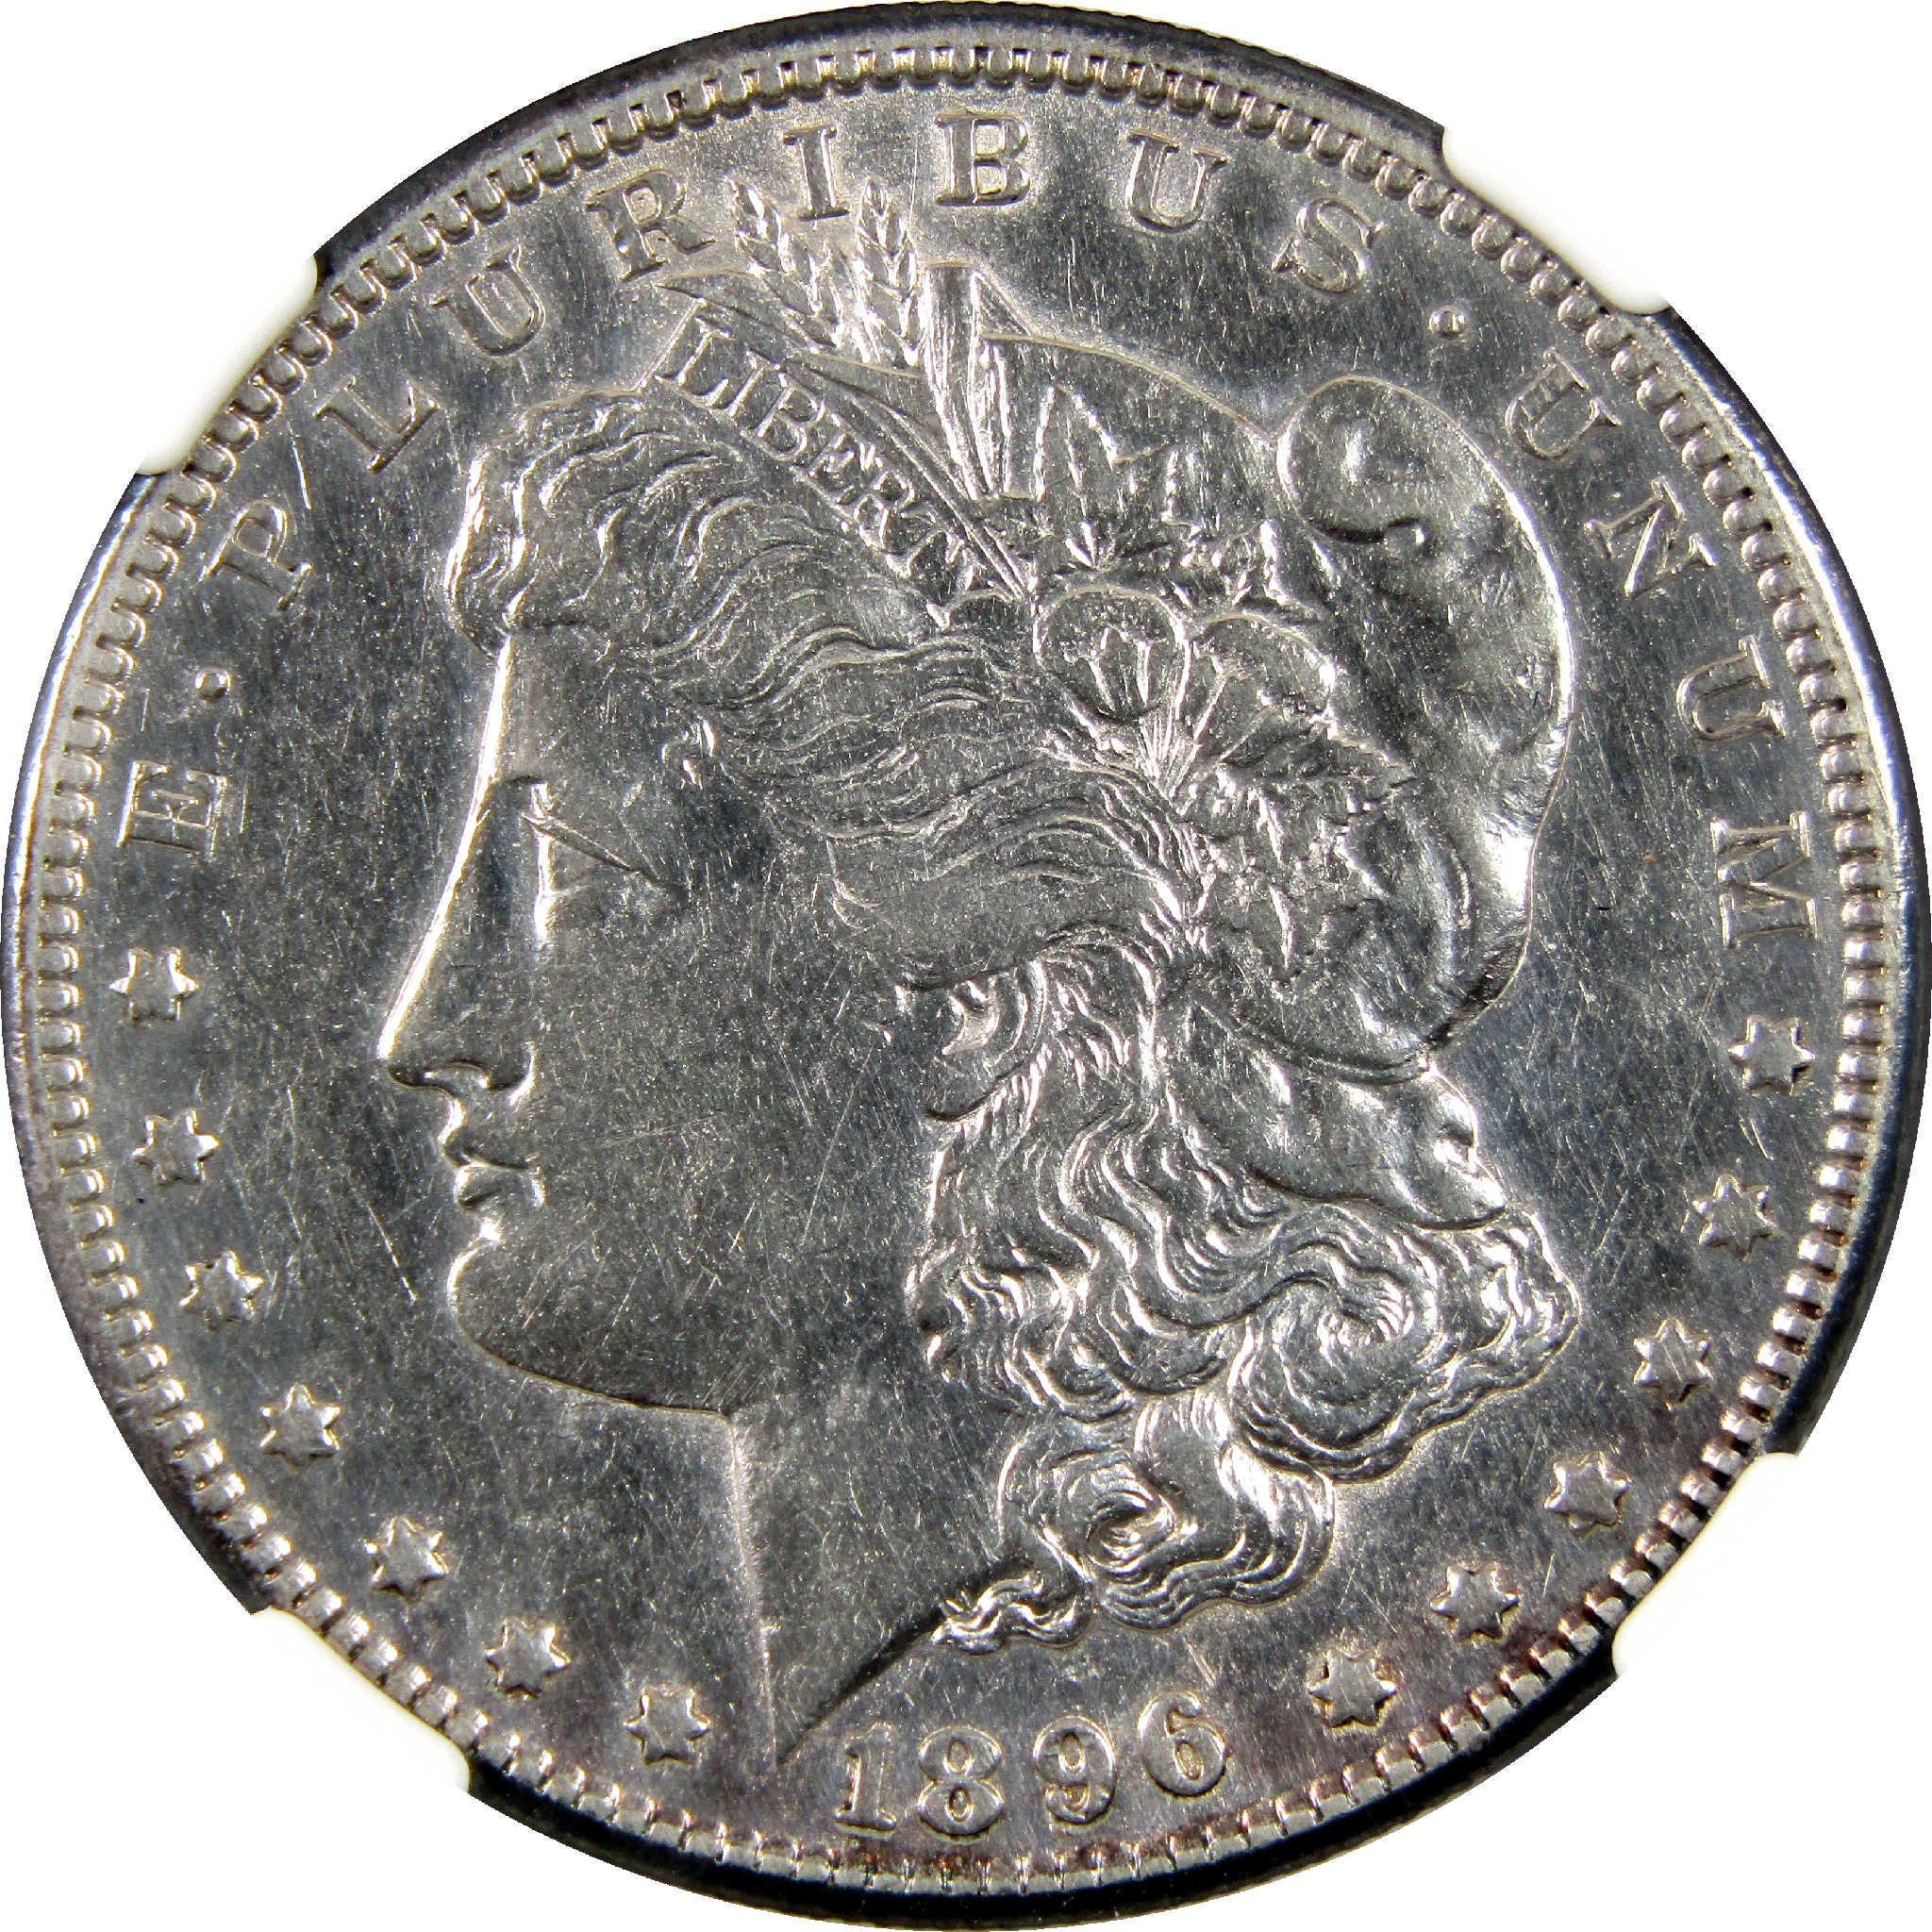 1896 S Morgan Dollar AU Details NGC Silver $1 Coin SKU:I11365 - Morgan coin - Morgan silver dollar - Morgan silver dollar for sale - Profile Coins &amp; Collectibles